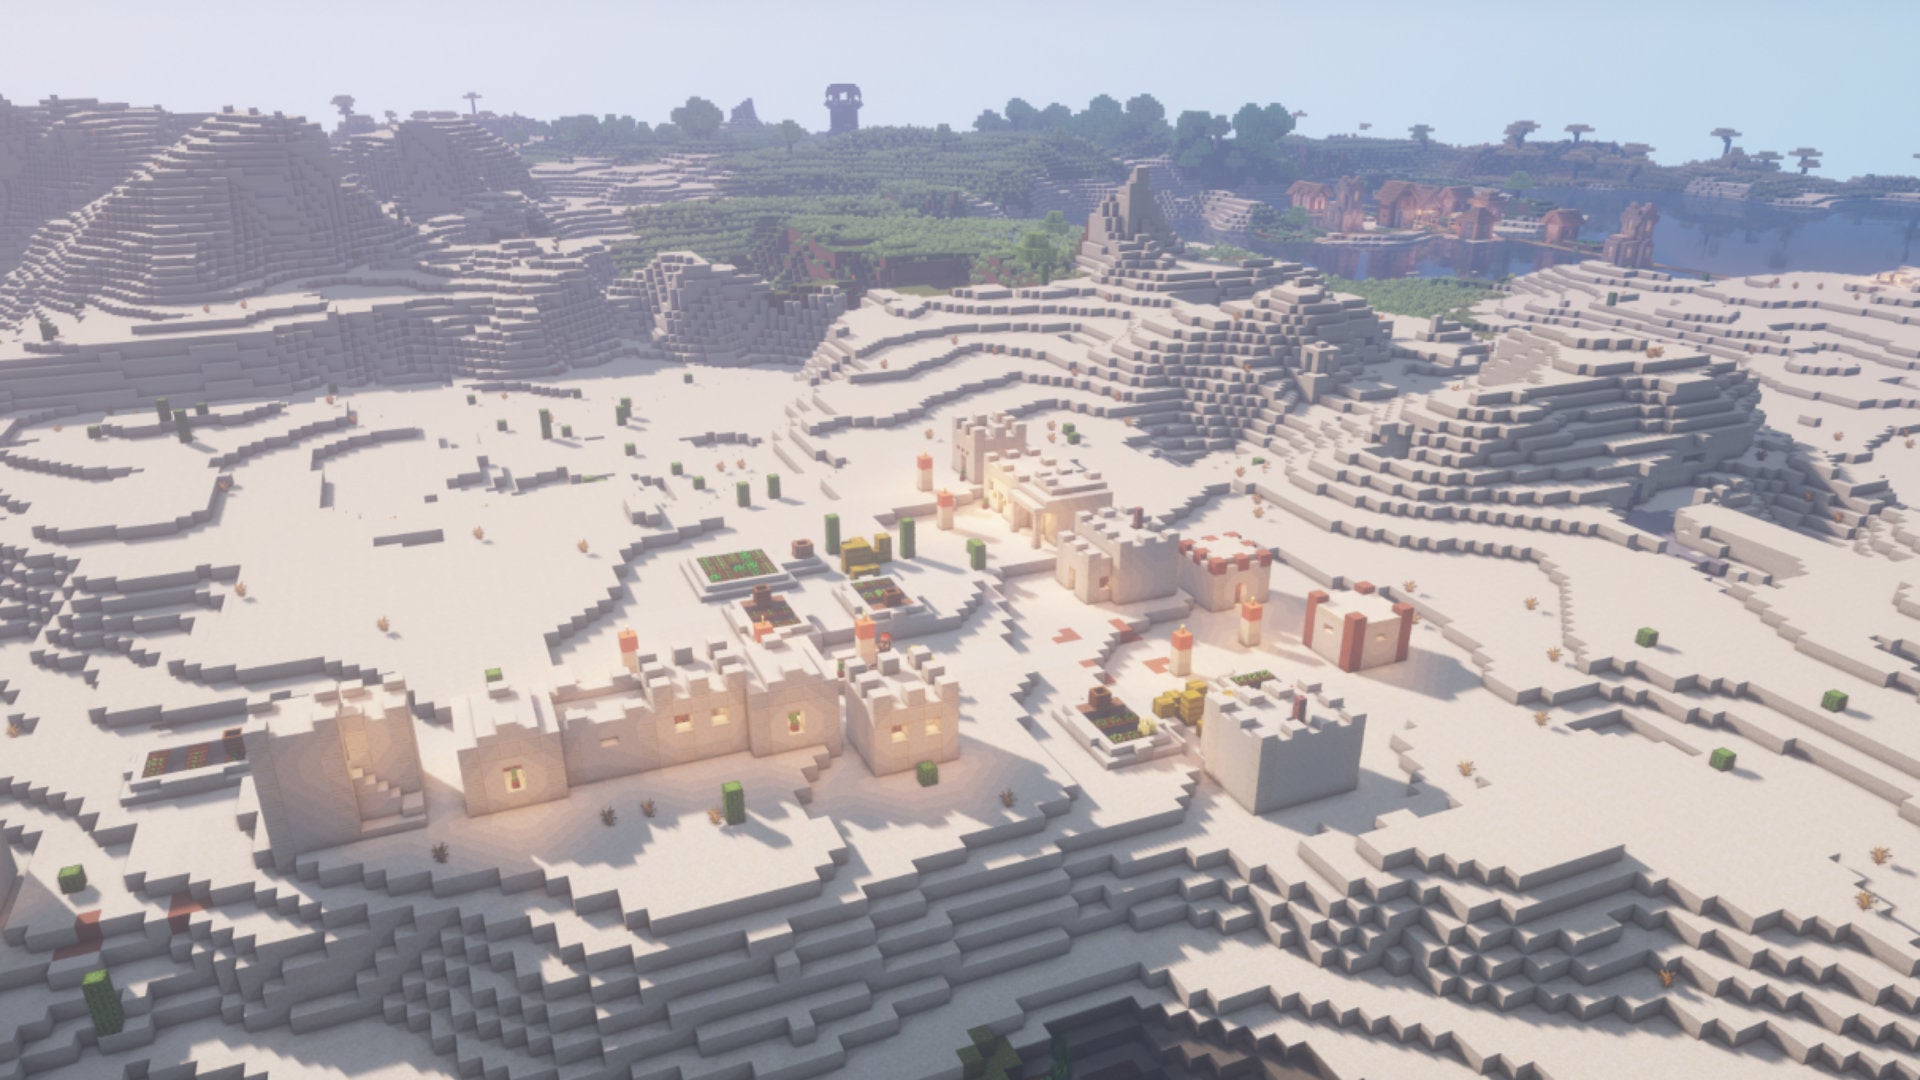 A desert village in Minecraft, viewed from an aerial perspective with shaders enabled.